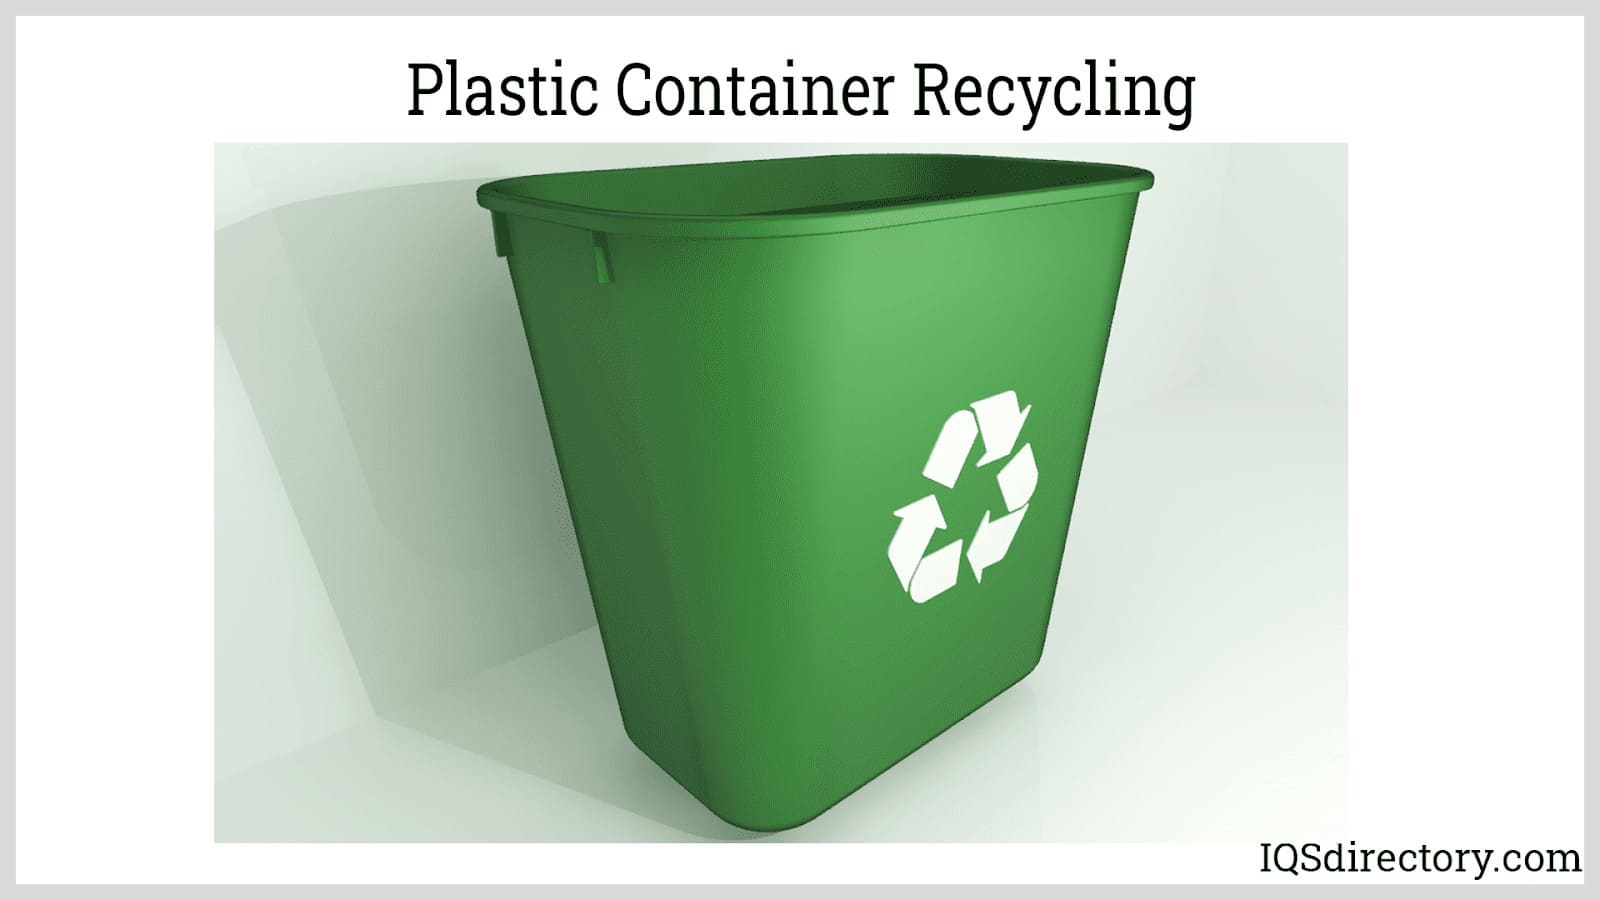 Plastic Container Recycling